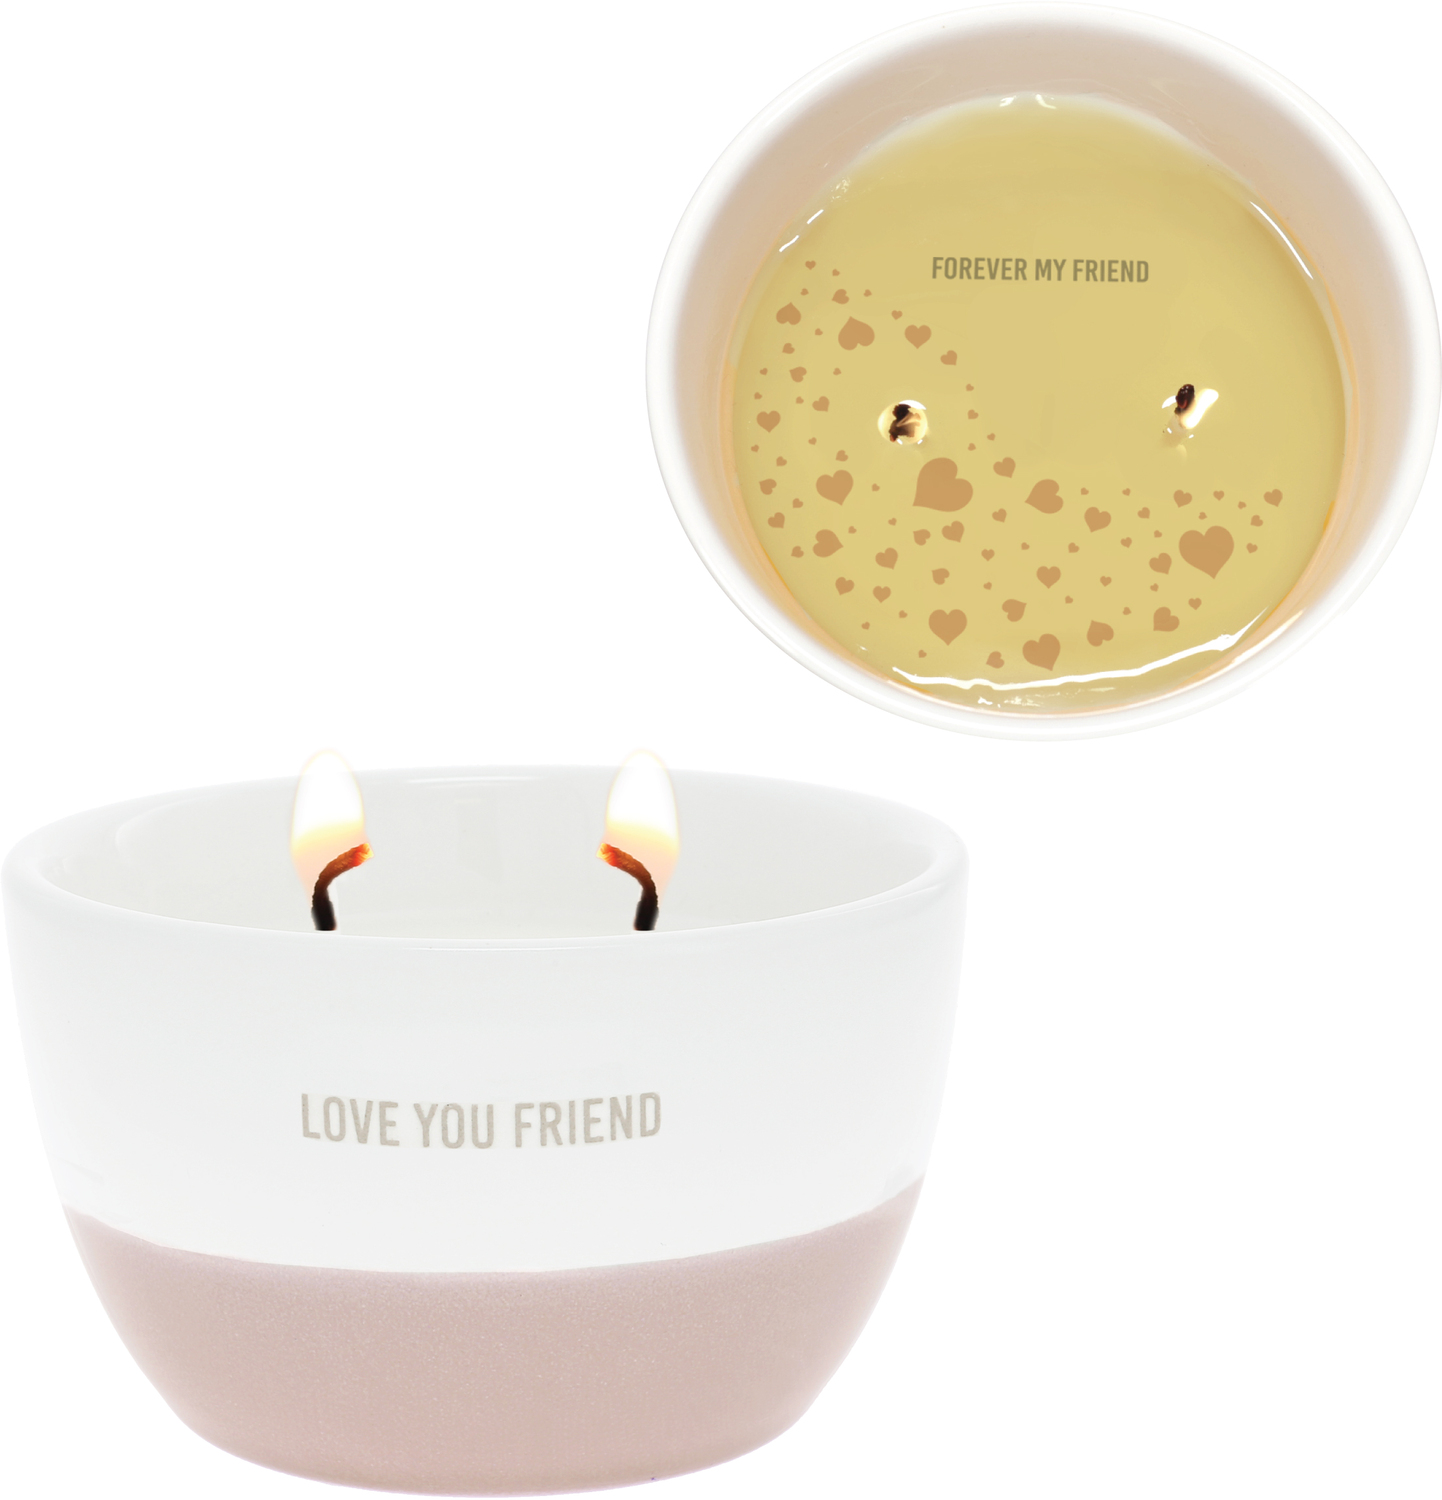 Love You Friend by Love You - Love You Friend - 11 oz - 100% Soy Wax Reveal Double Wick Candle
Scent: Tranquility